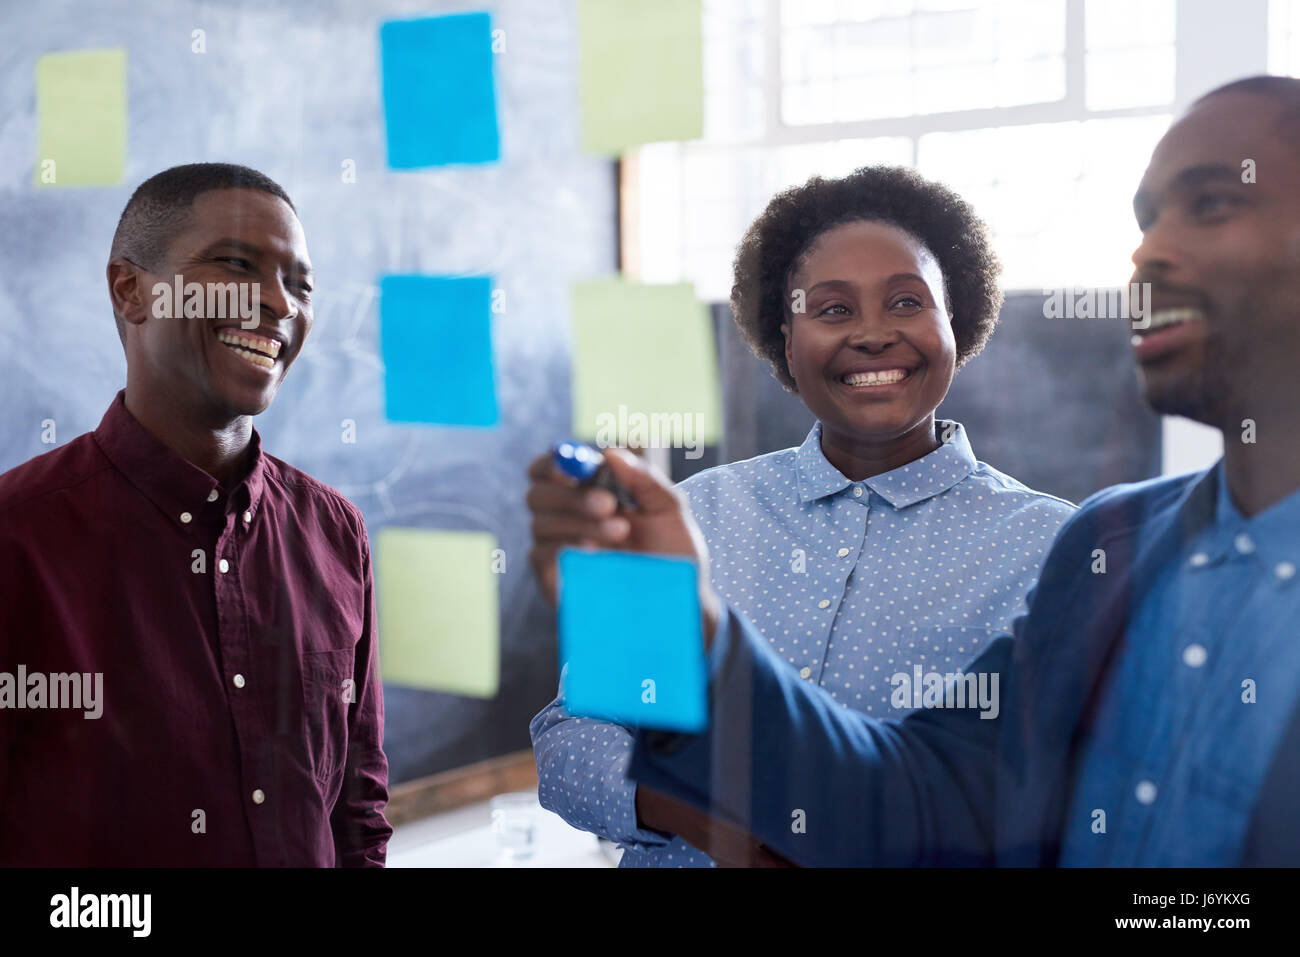 Smiling African work colleagues brainstorming in an office Stock Photo